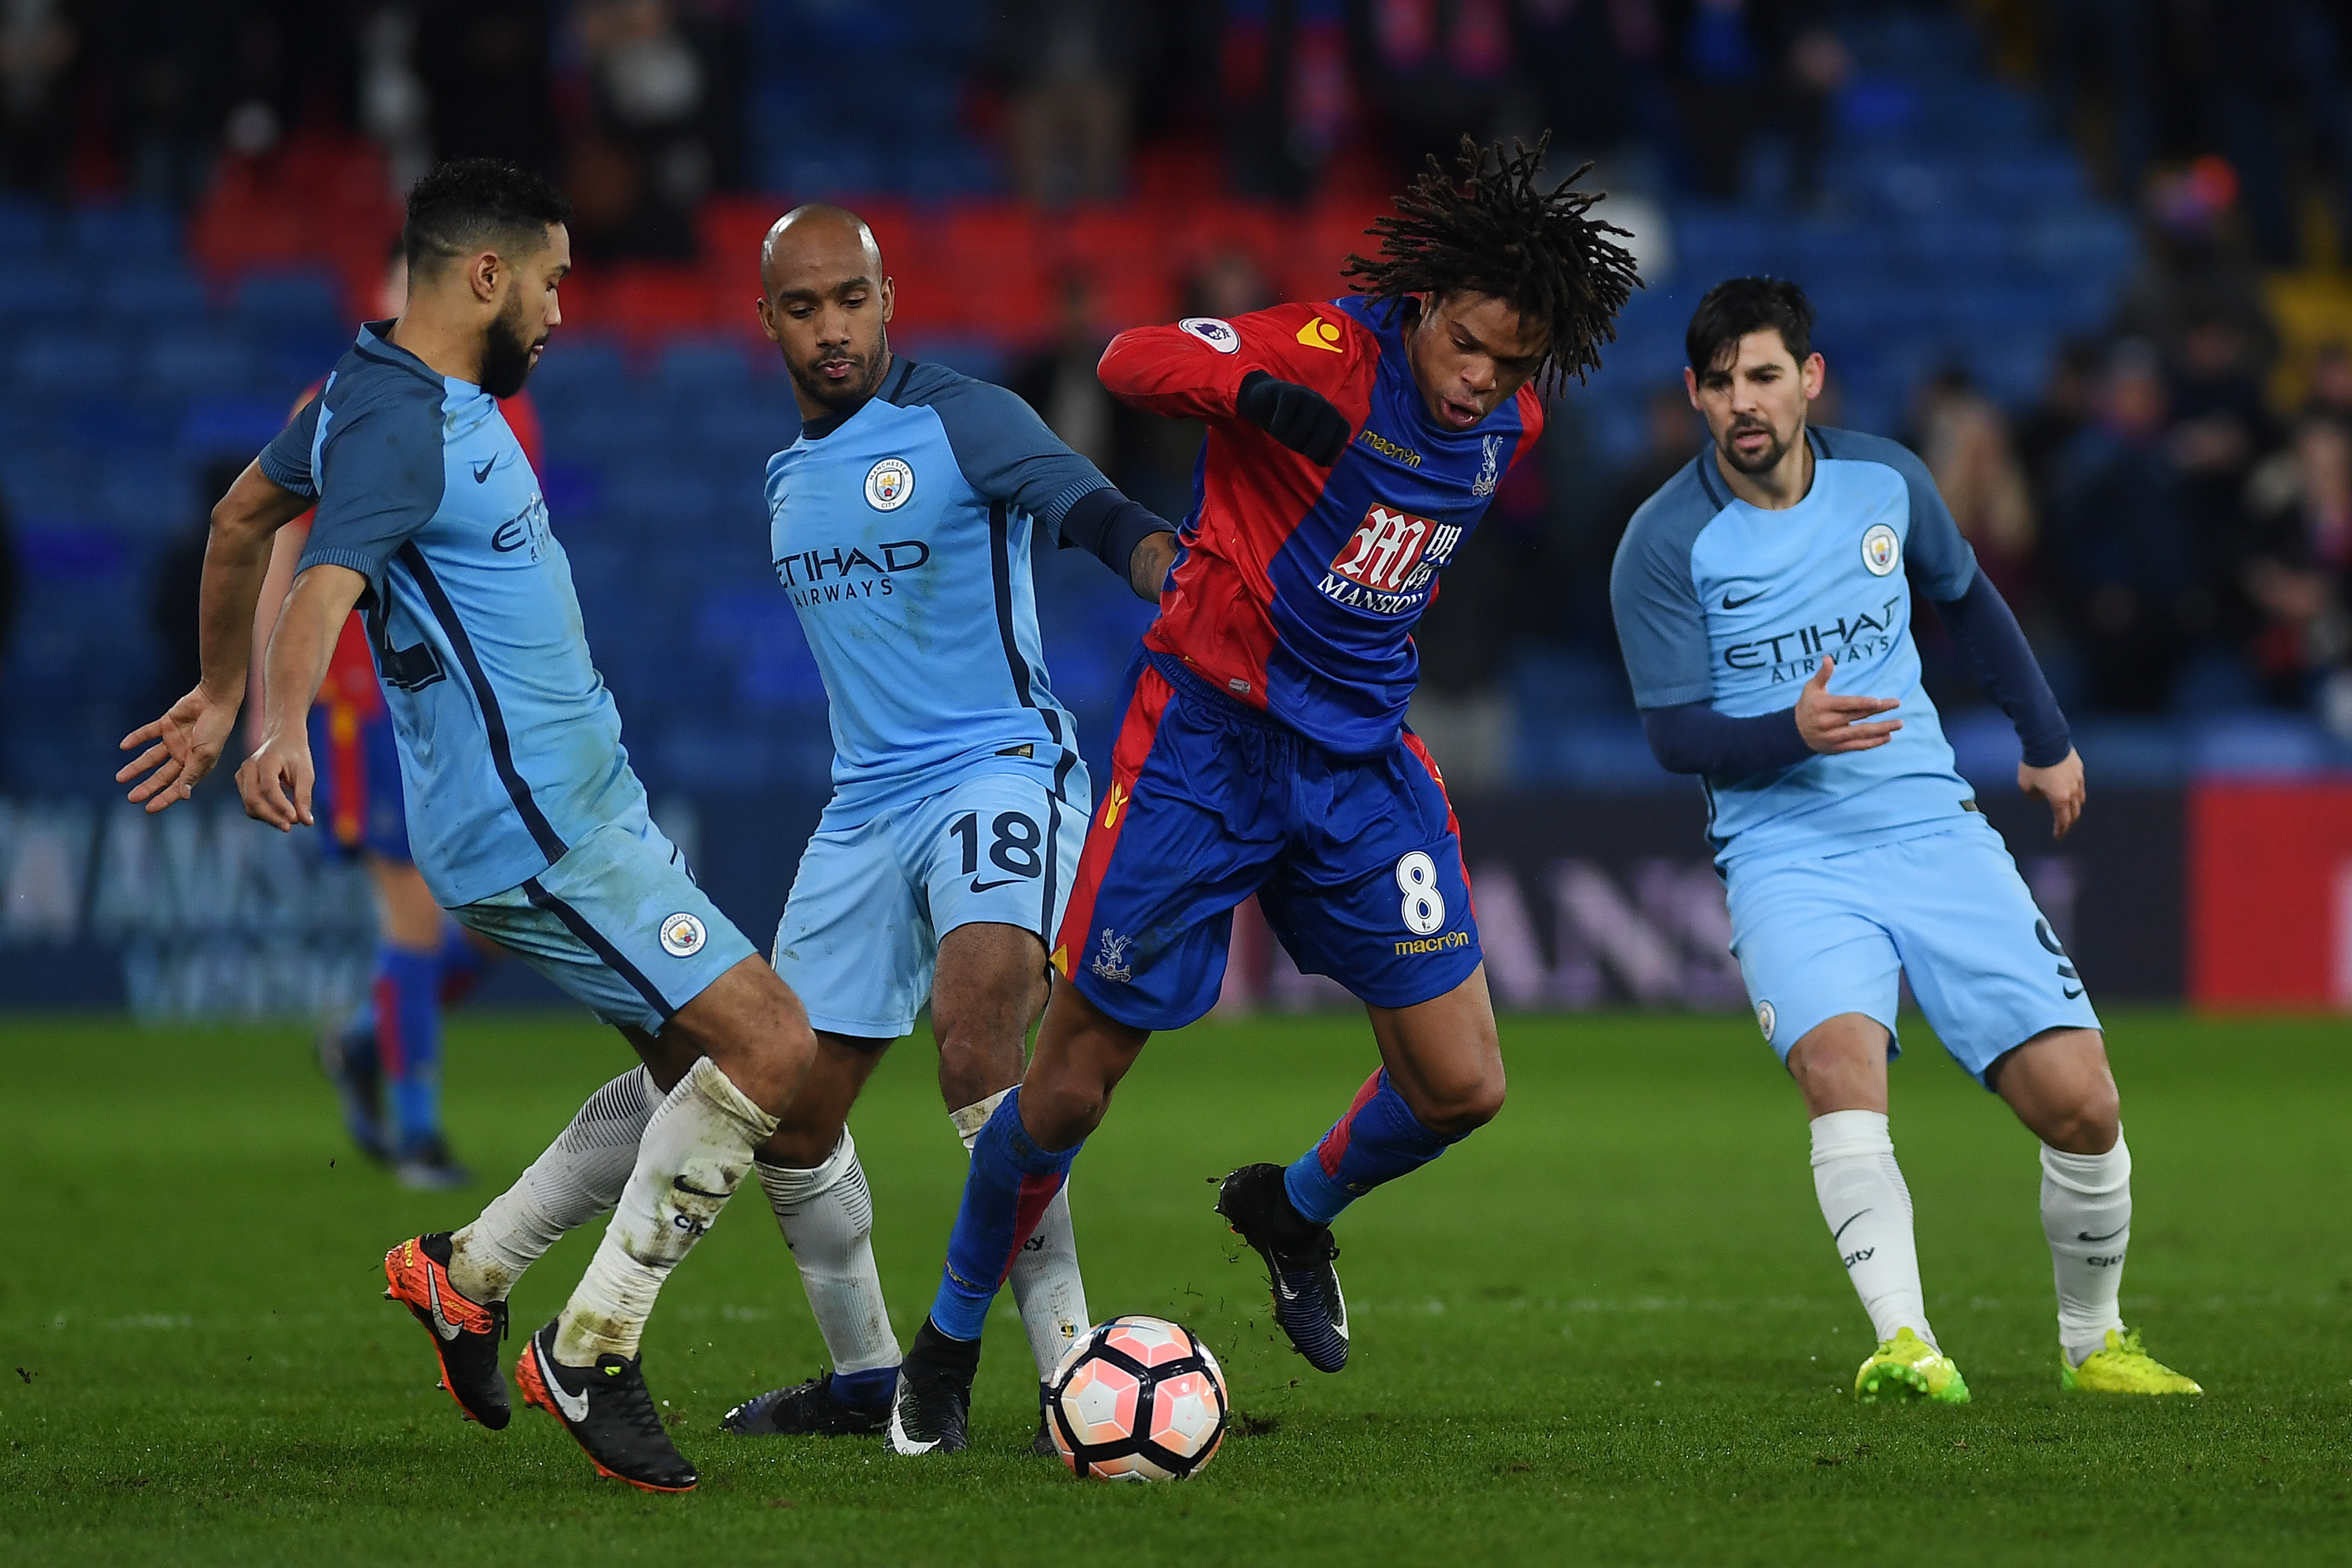 LONDON, ENGLAND - JANUARY 28:  Loic Remy of Crystal Palace is surrounded by Gael Clichy, Fabian Delph and Nolito of Manchester City during the The Emirates FA Cup Fourth Round match between Crystal Palace and Manchester City at Selhurst Park on January 28, 2017 in London, England.  (Photo by Mike Hewitt/Getty Images)